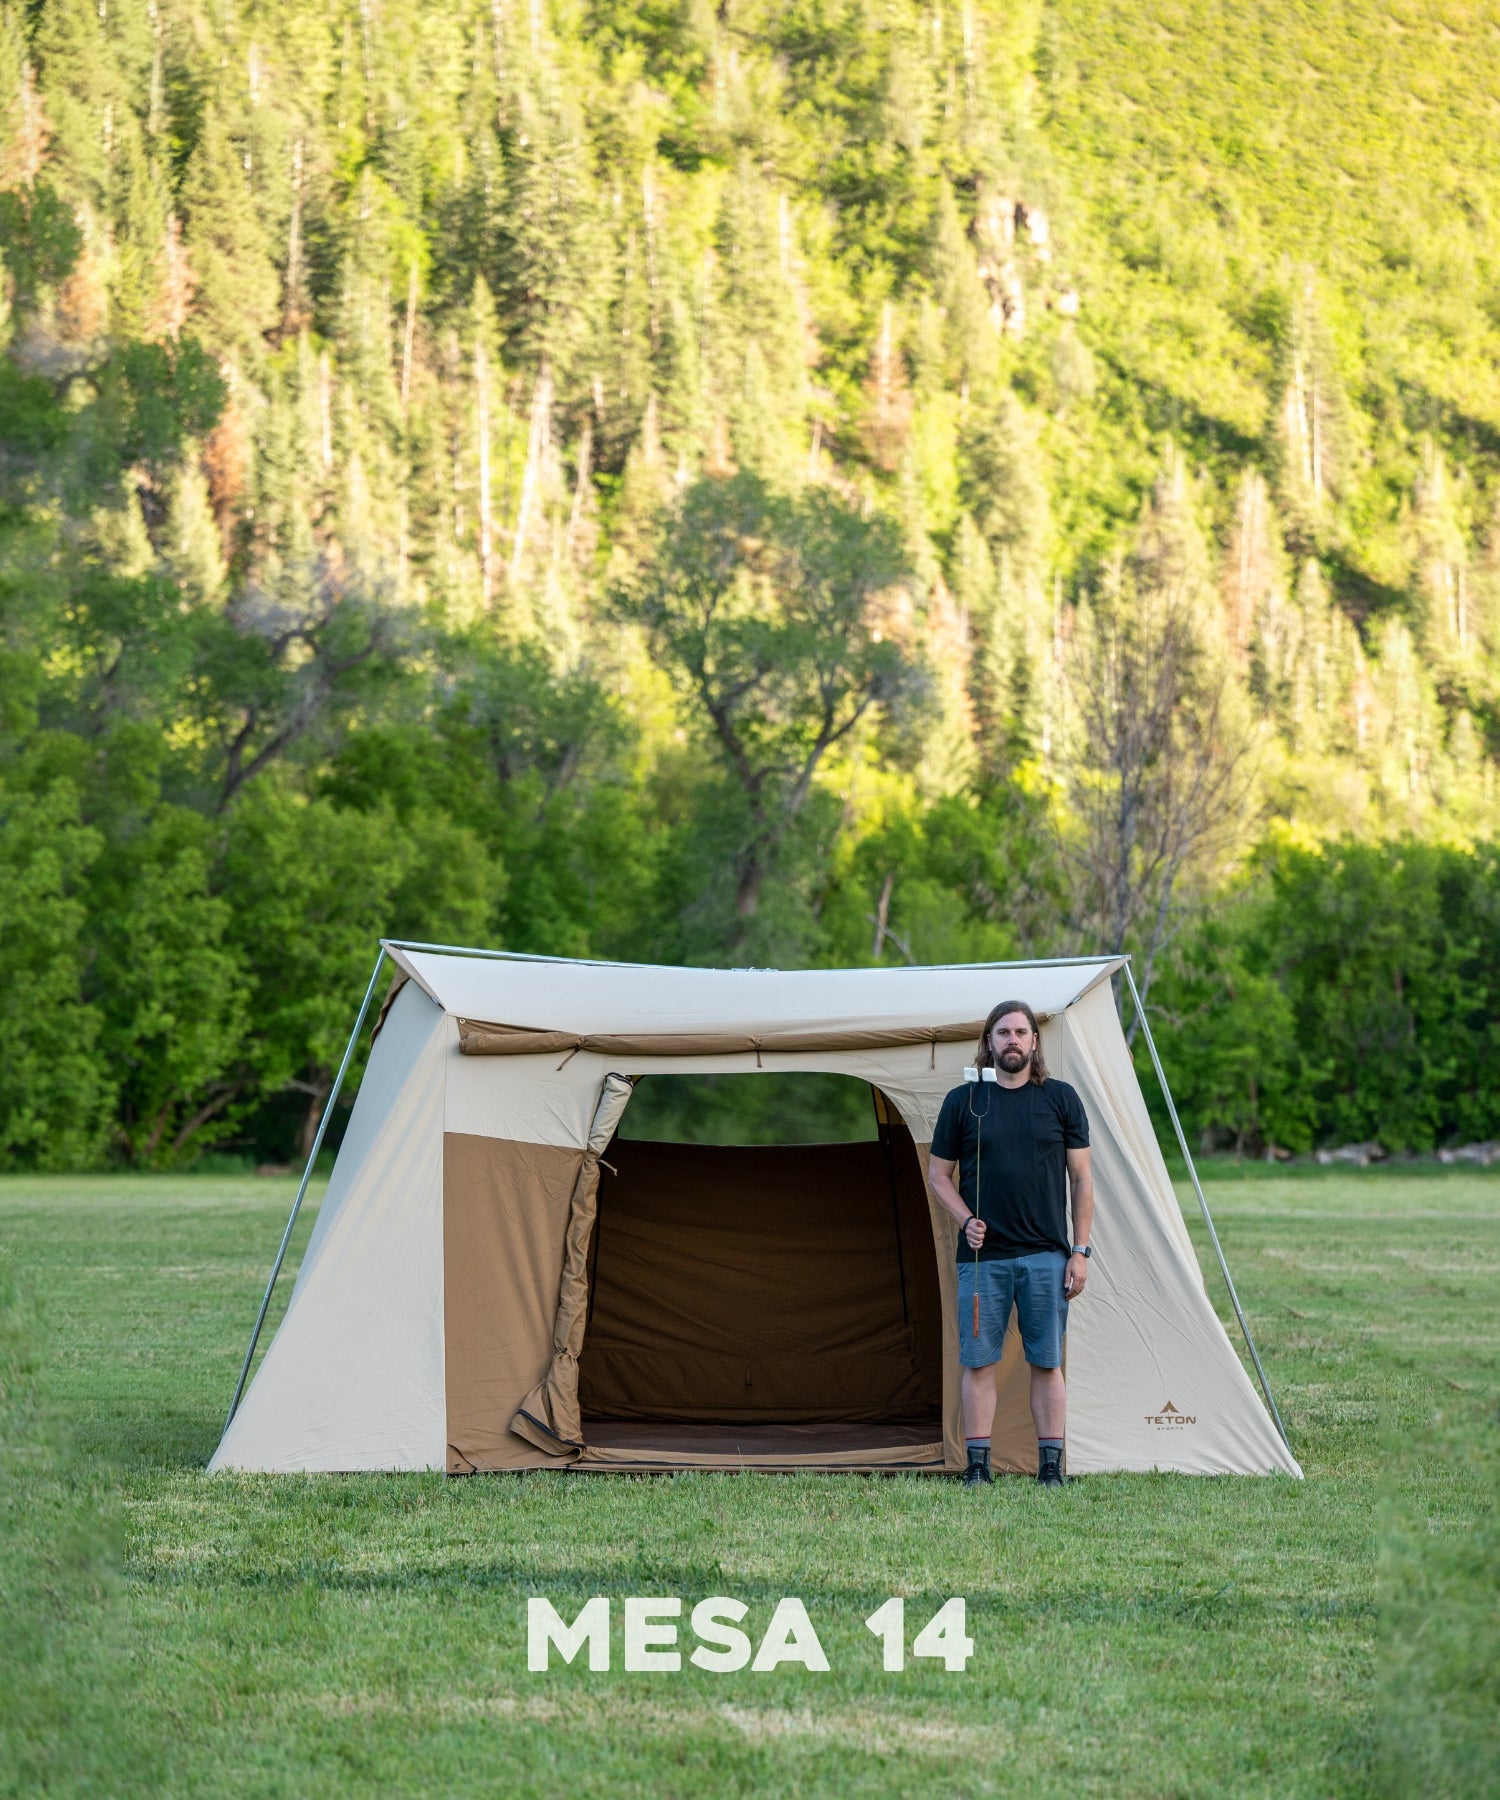 The TETON Sports Mesa 10' x 14' Canvas Tent: : Image shows a man standing in front of the tent with a marshmallow stick to show comparative size.